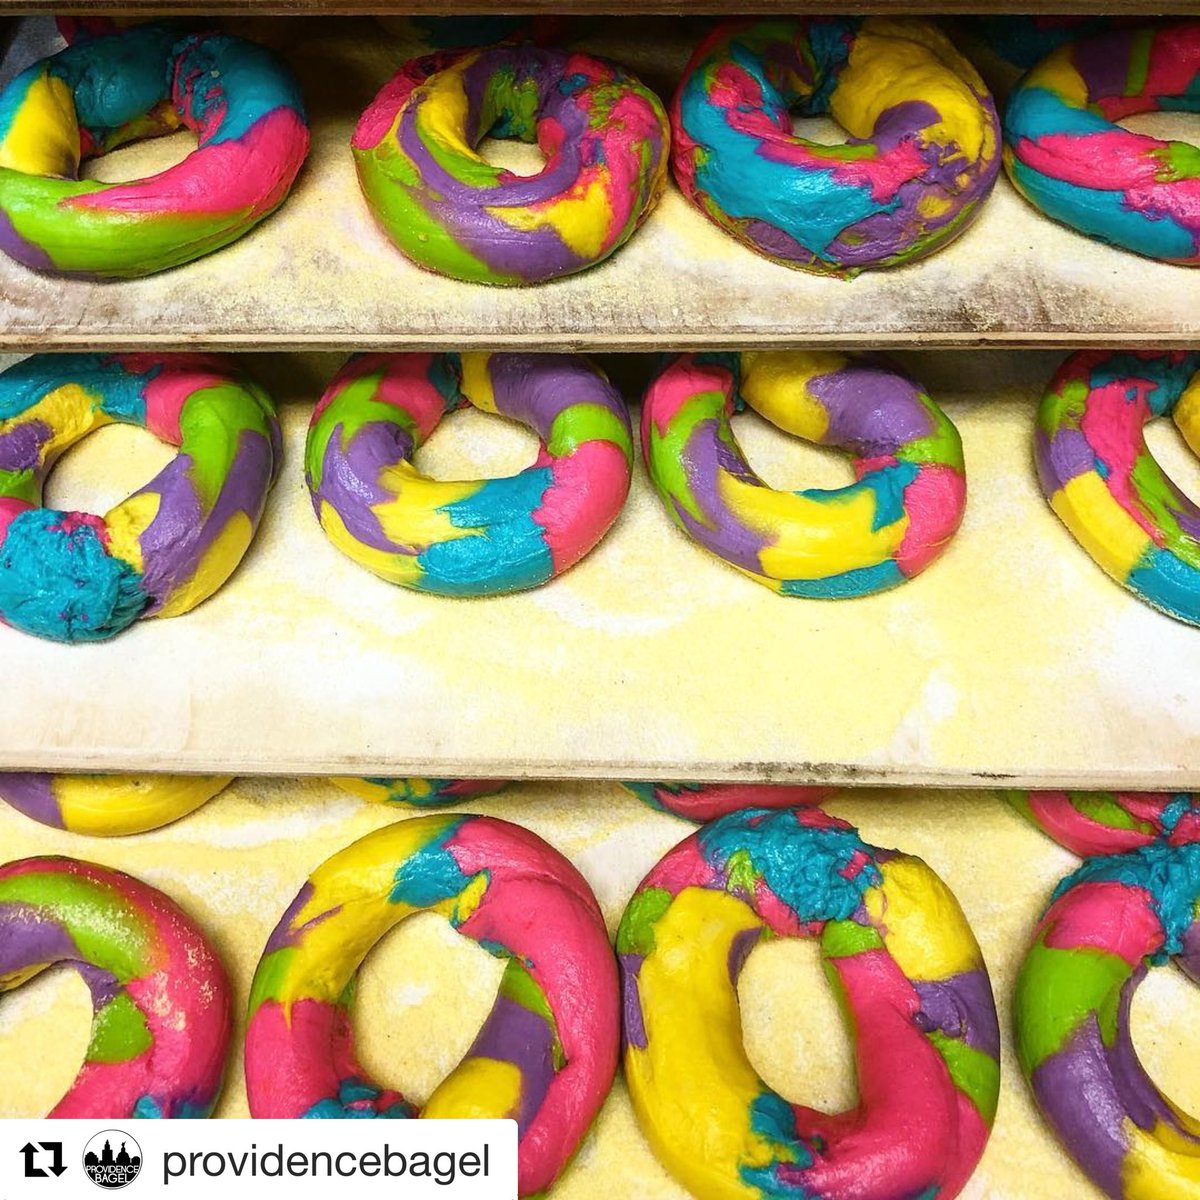 Easter is about to get a whole lot yummier! Order your #rainbowbagels from @Providencebagel by tomorrow for Easter Sunday 🌈🐰

#foodie #pvdeats #smallstatebigeats #foodfun #easter #tastetherainbow